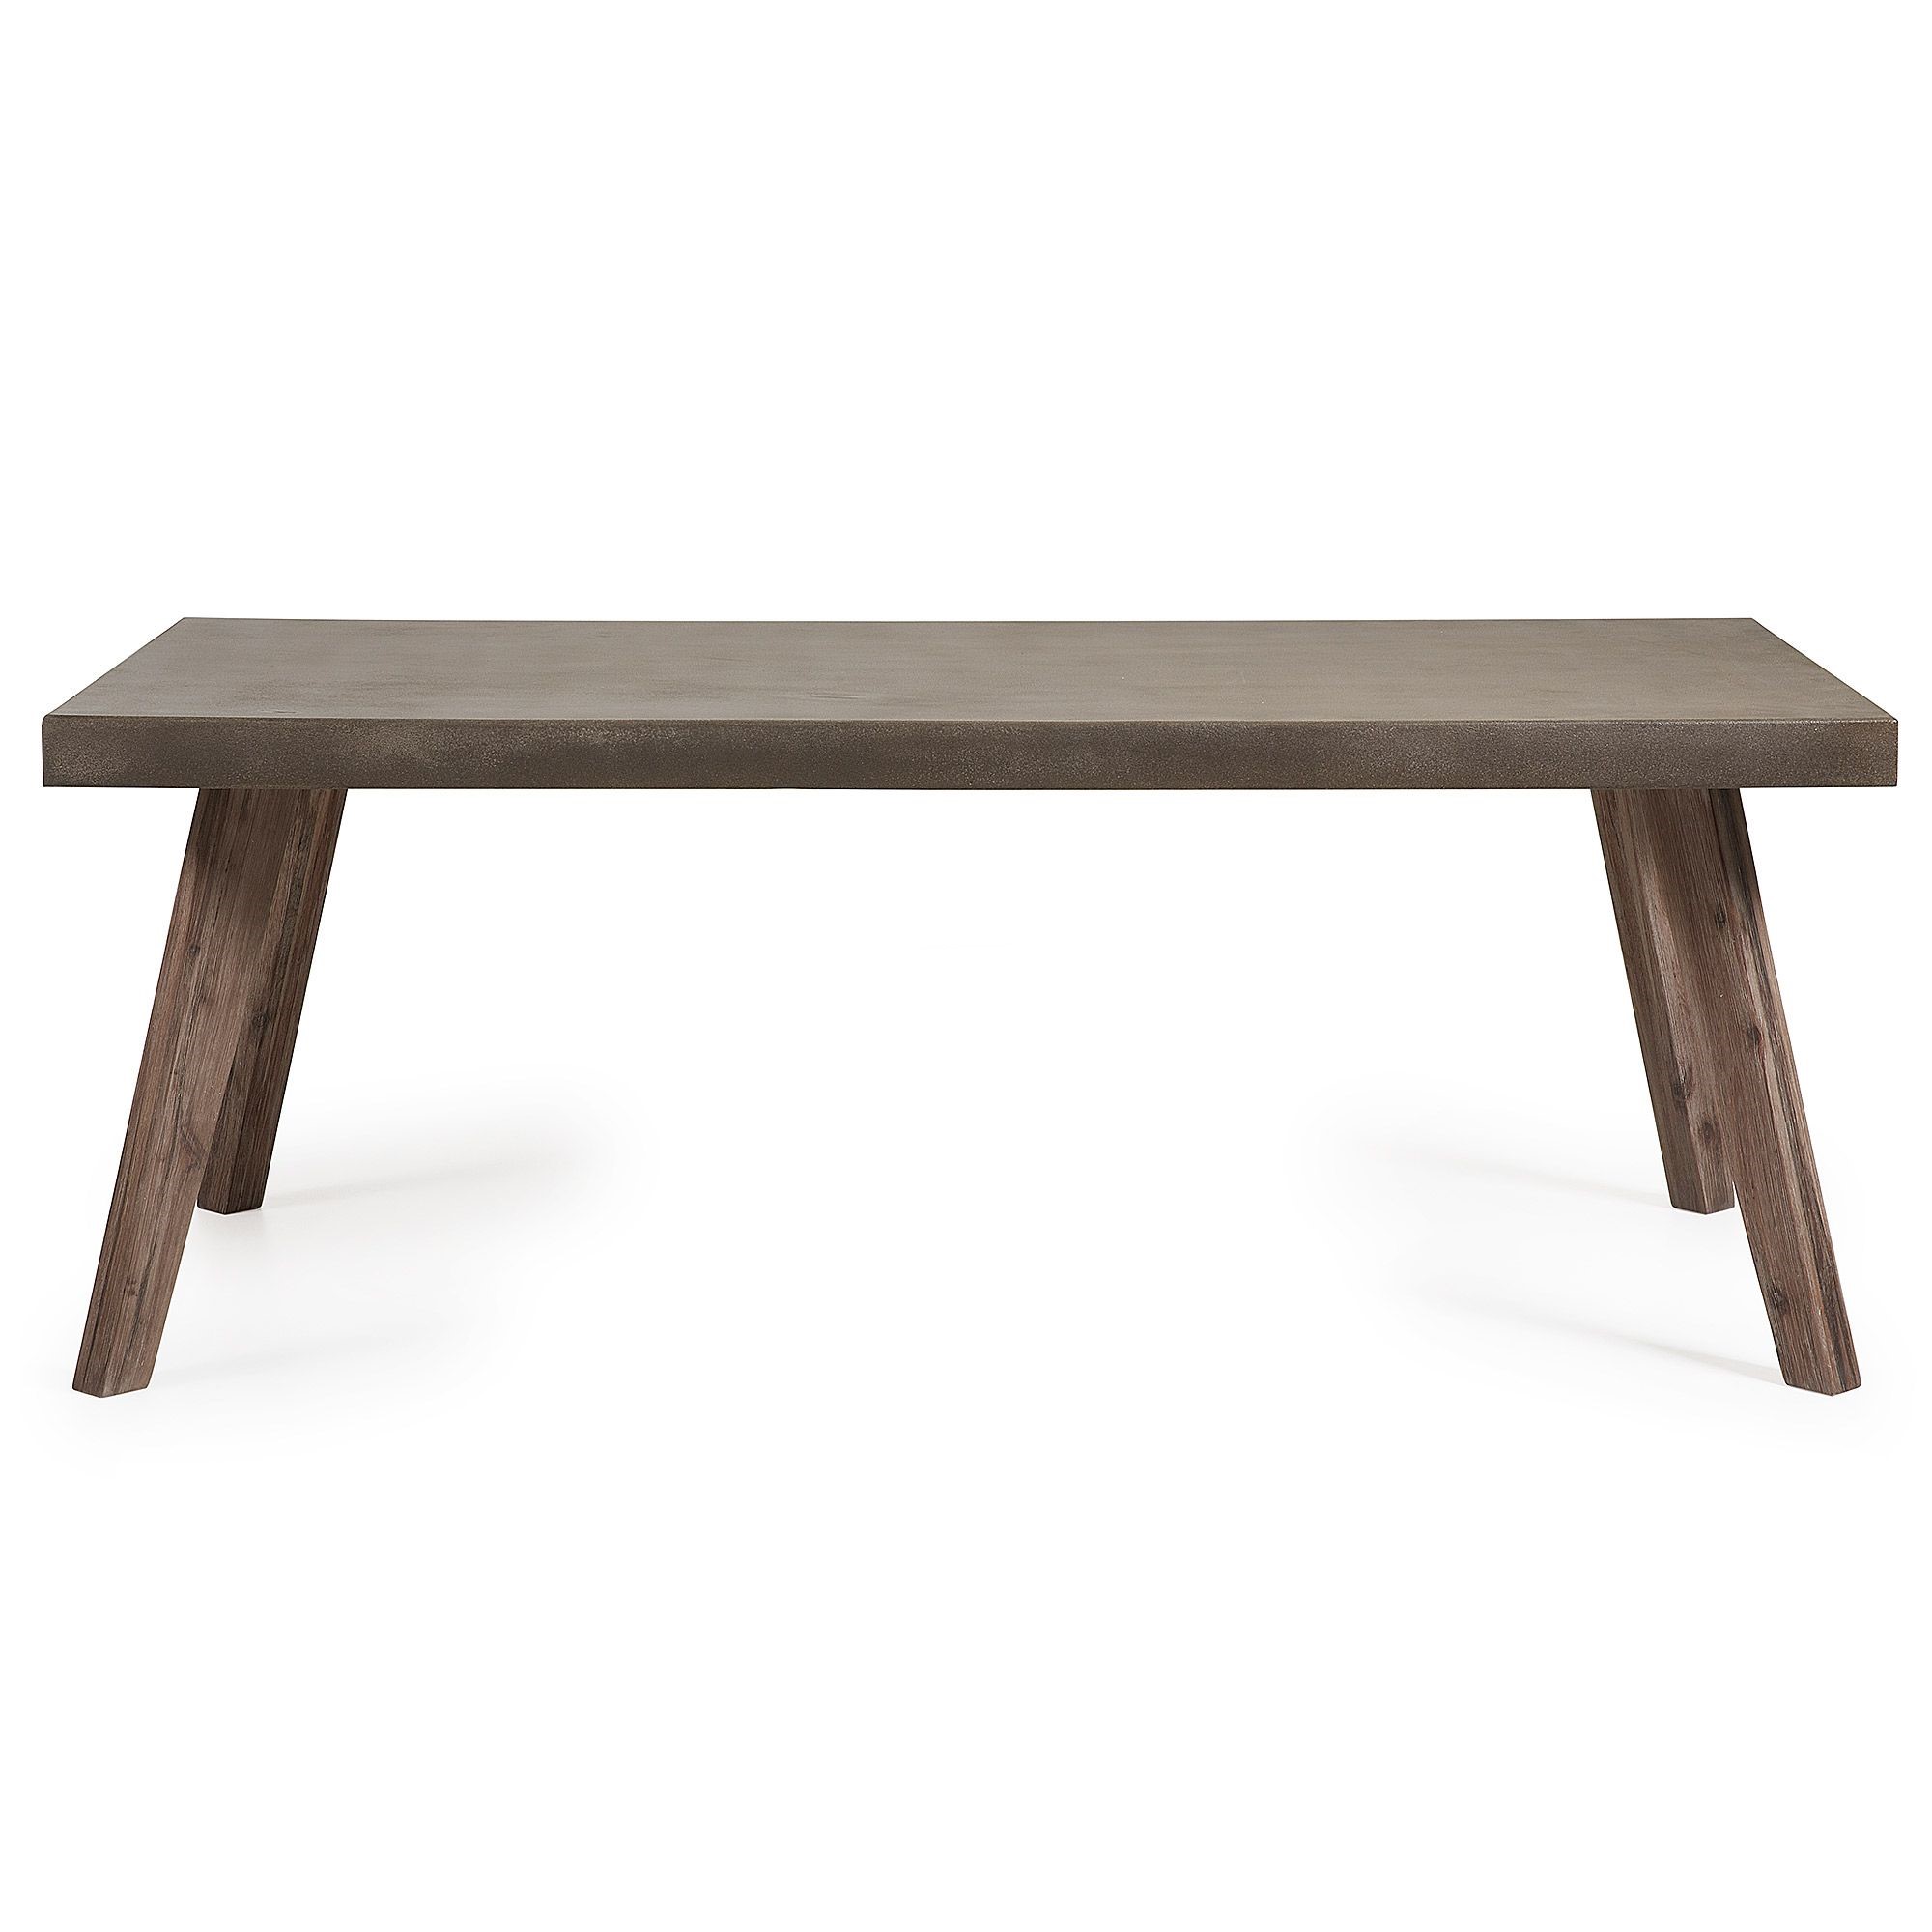 Dining Table Alberta Acacia Frame w/ Concrete Top  2000 x 1000mm